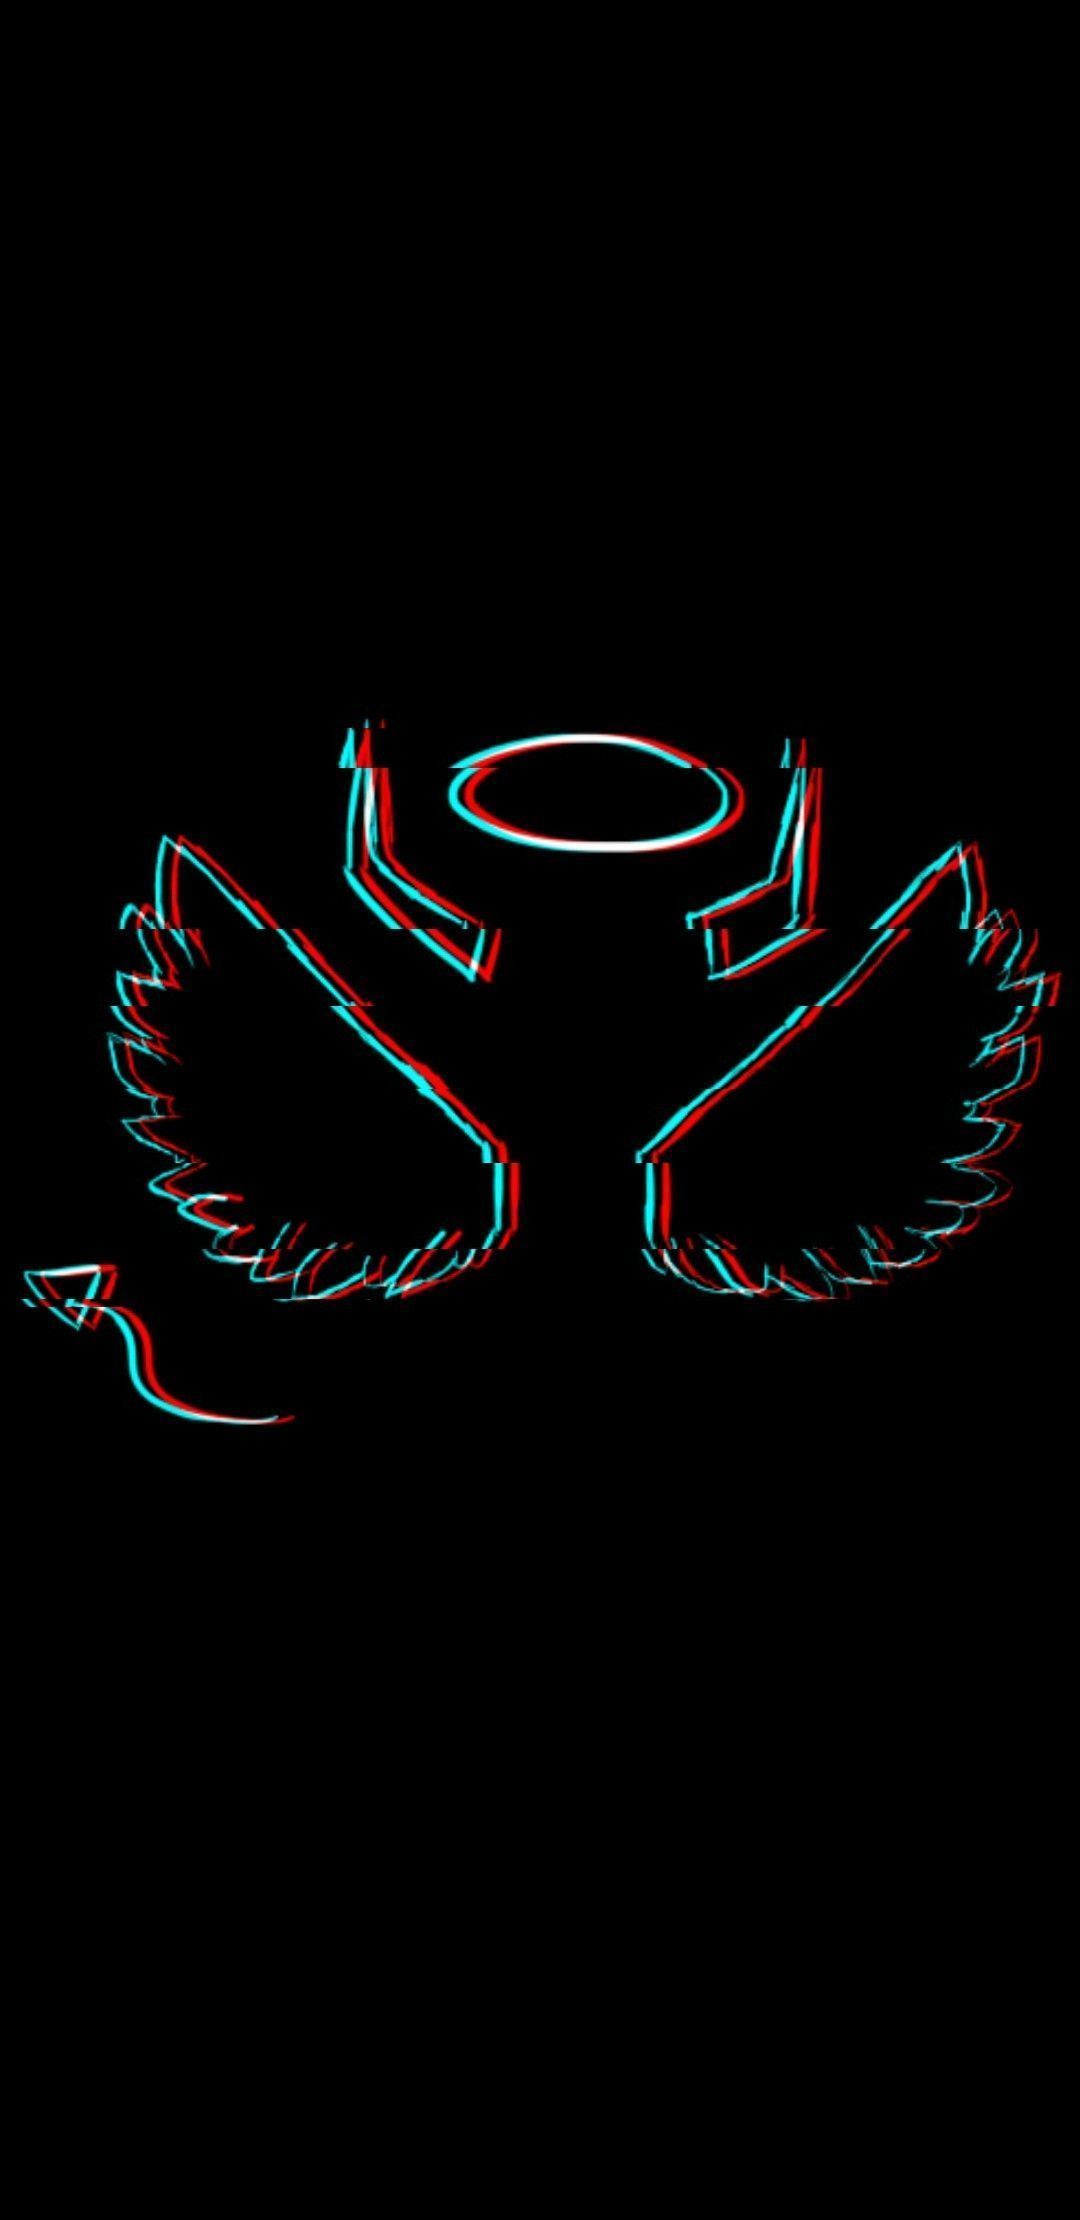 A 3d image of an angel with wings - Glitch, black glitch